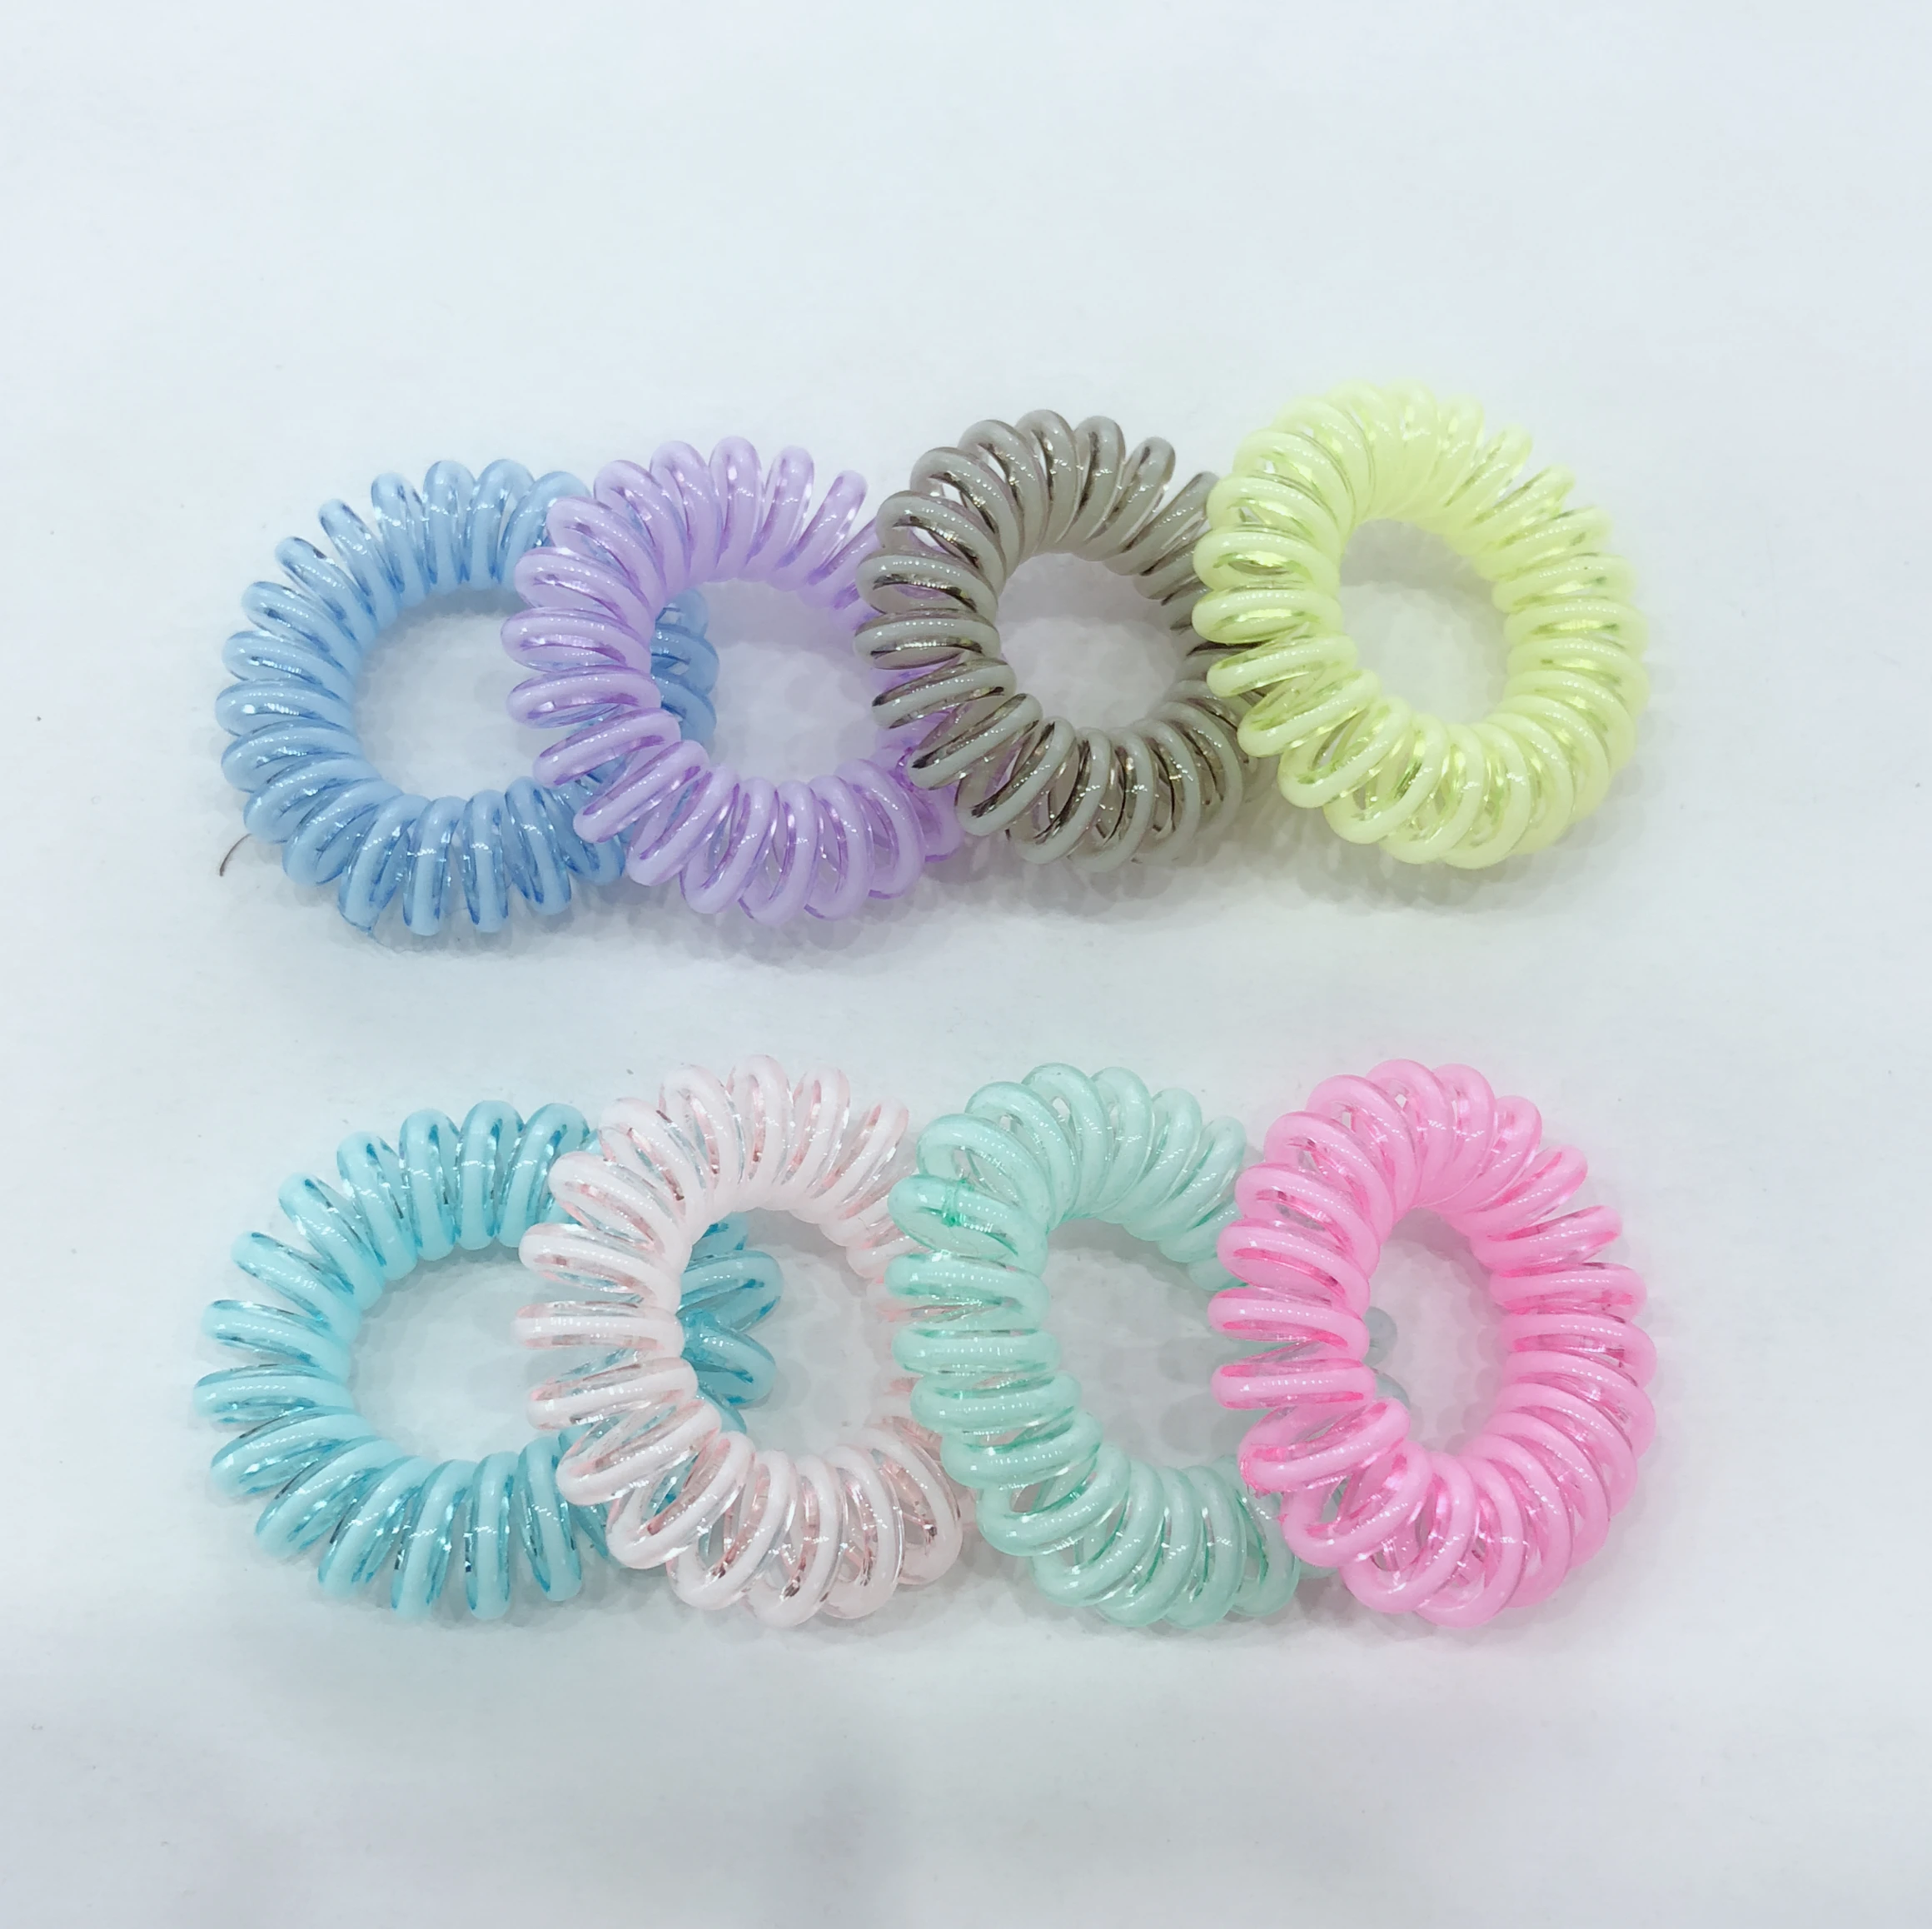 High Quality Curl Hair Band Elastic Bracelet Ponytail Holders Traceless  Plastic Hair Ring And Hair Ties - Buy Curl Hair Band,Hair Ring,Hair Ties  Product on 